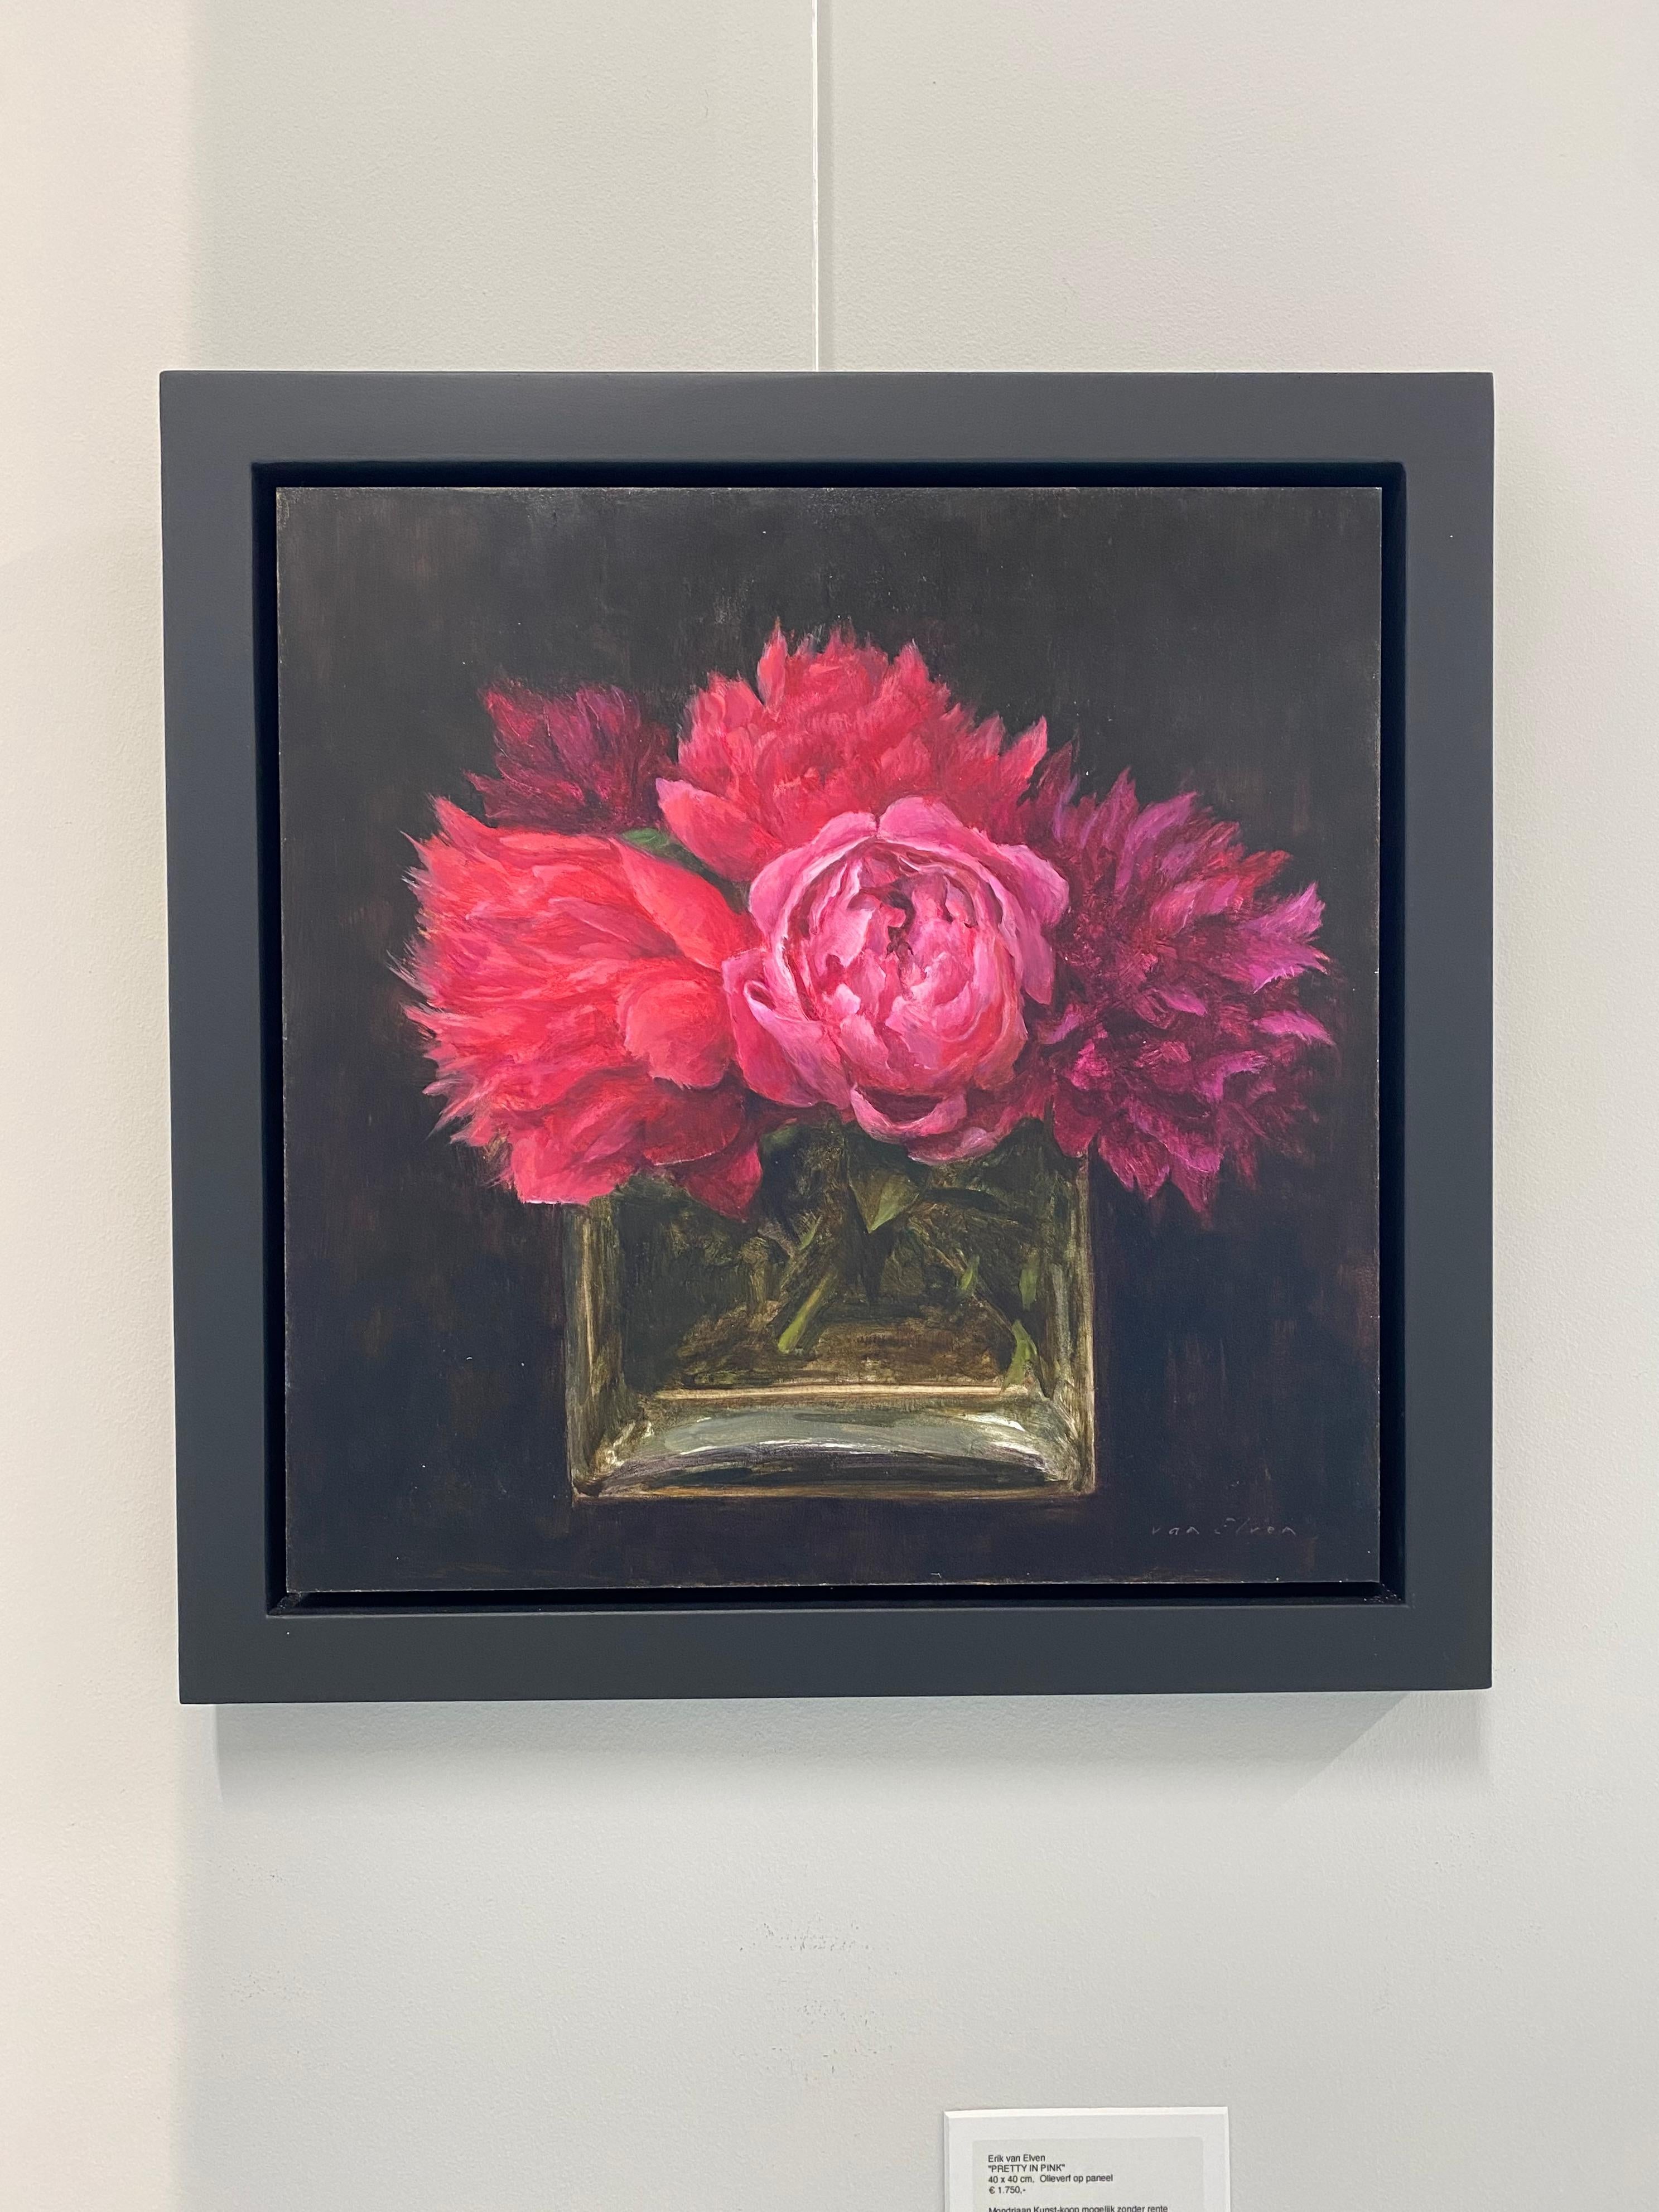 Pretty in Pink- 21st Century Still-life painting, Pink Peonies in a Square Vase - Painting by Erik van Elven